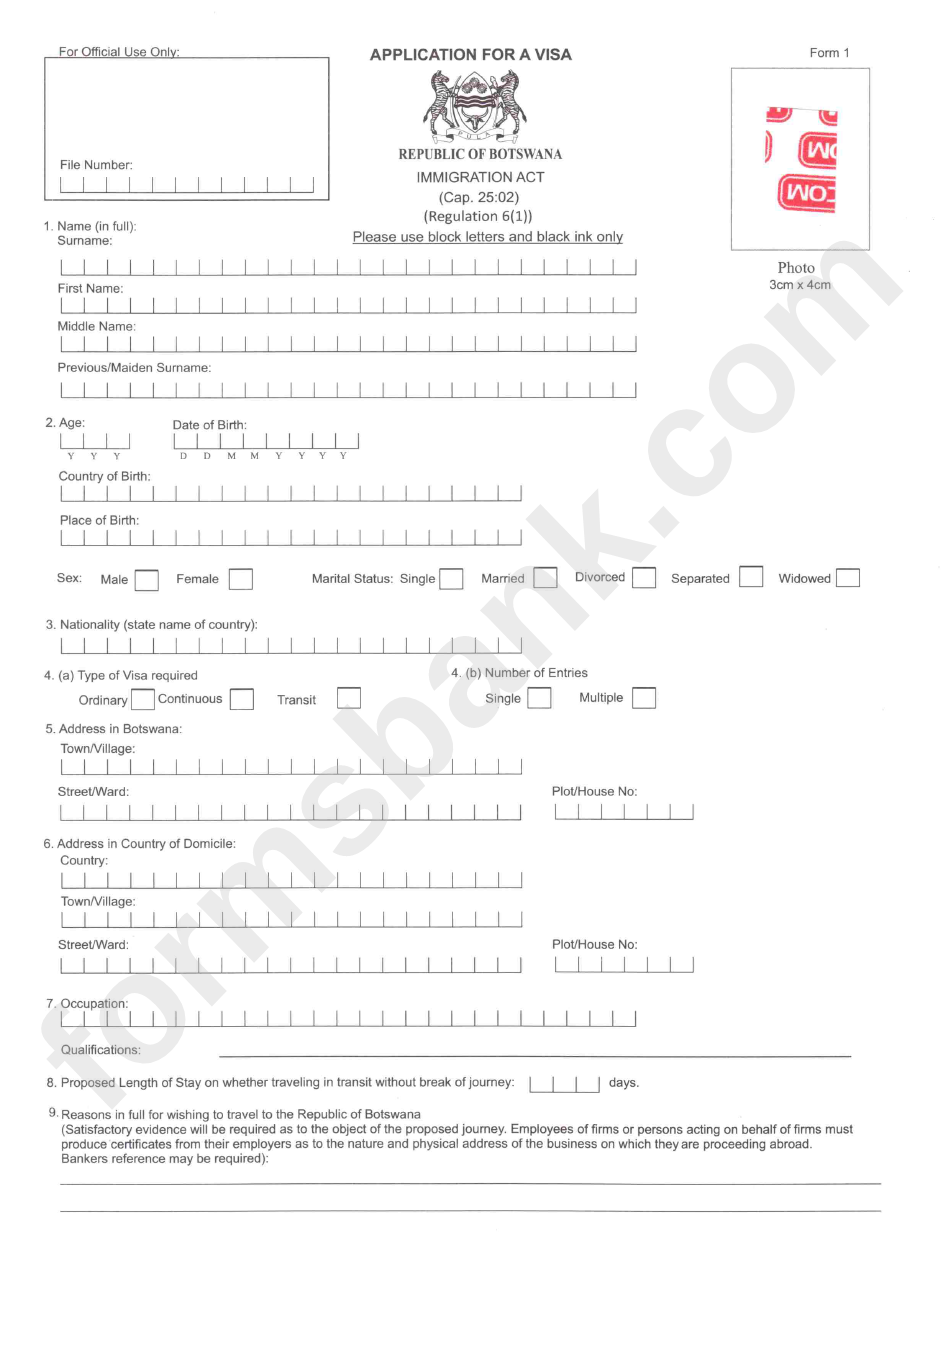 Application For A Visa - Imigration Act